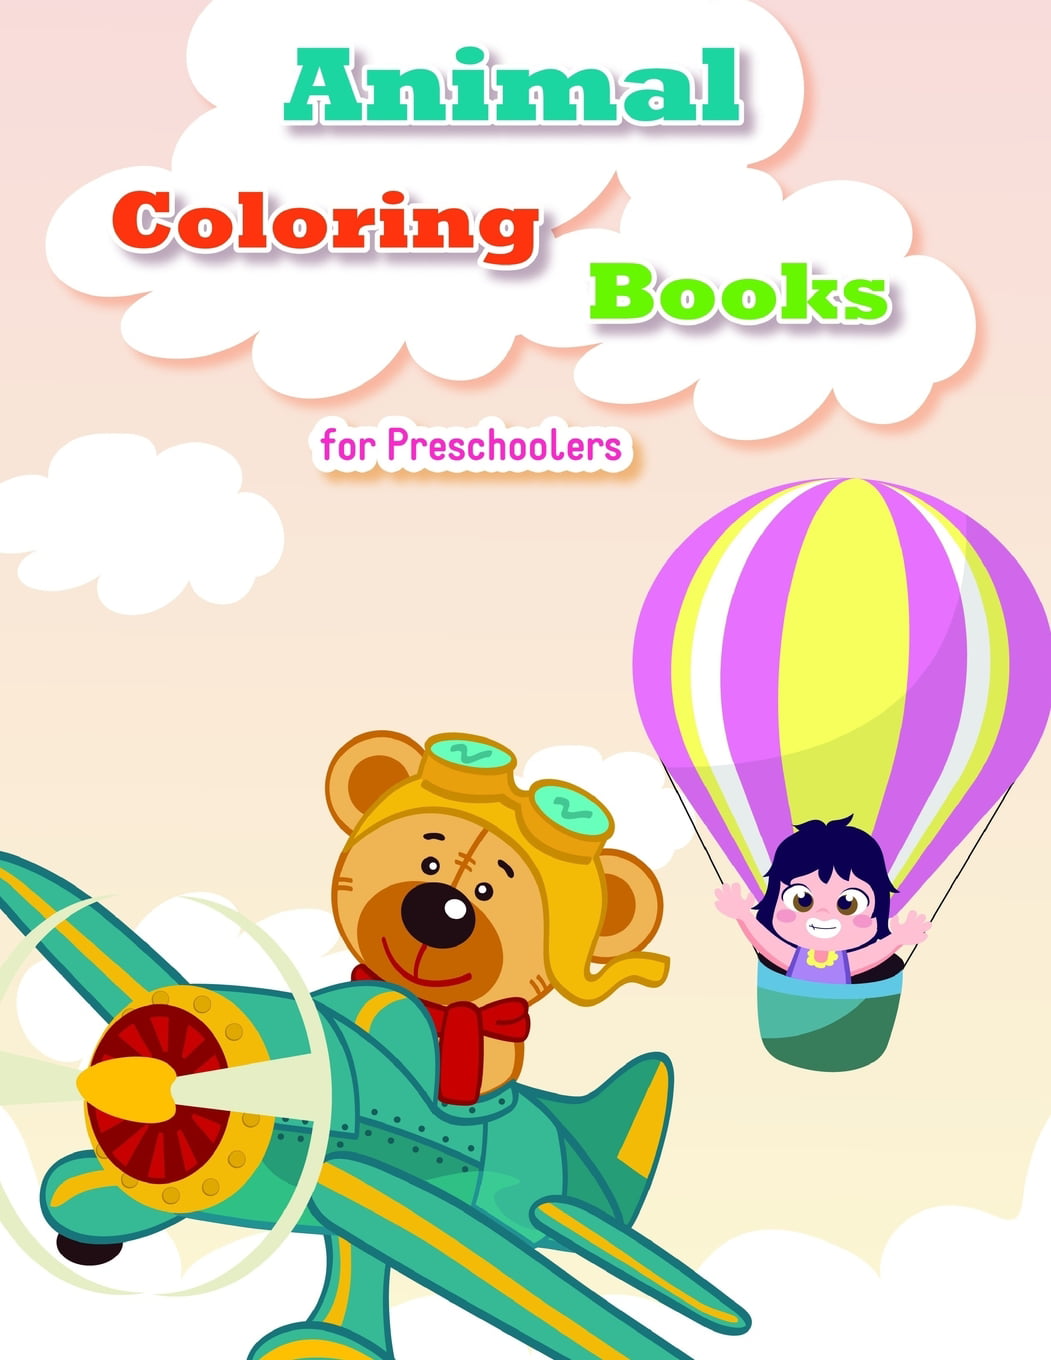 Early Learning Animal Coloring Books for Preschoolers  The Coloring Books  for Animal Lovers, design for kids, Children, Boys, Girls and Adults ...